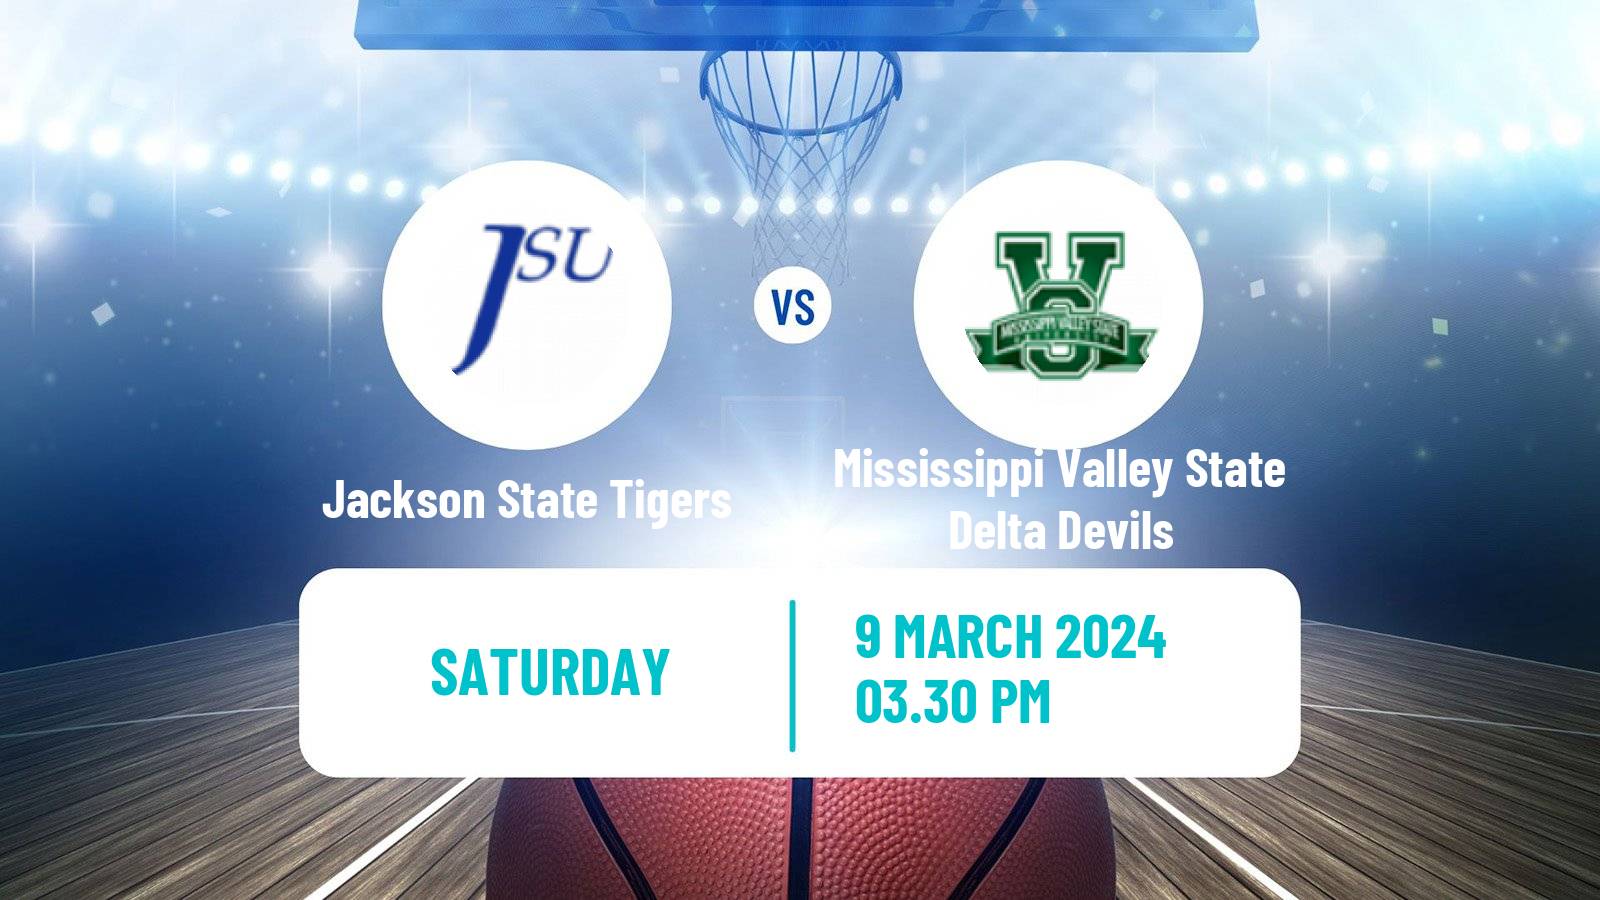 Basketball NCAA College Basketball Jackson State Tigers - Mississippi Valley State Delta Devils